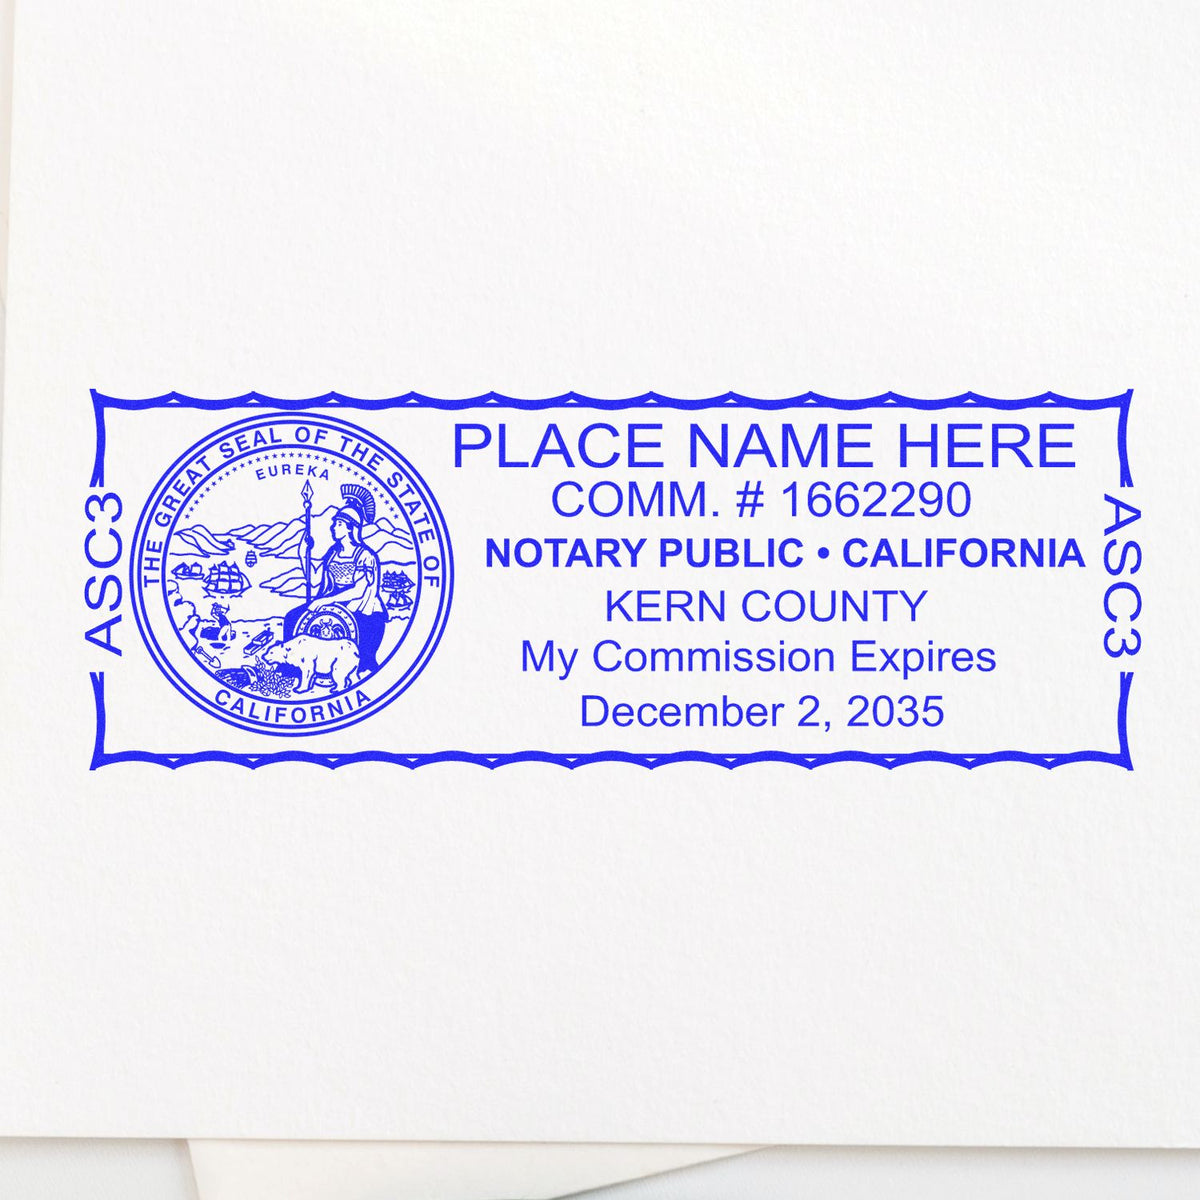 An alternative view of the Super Slim California Notary Public Stamp stamped on a sheet of paper showing the image in use